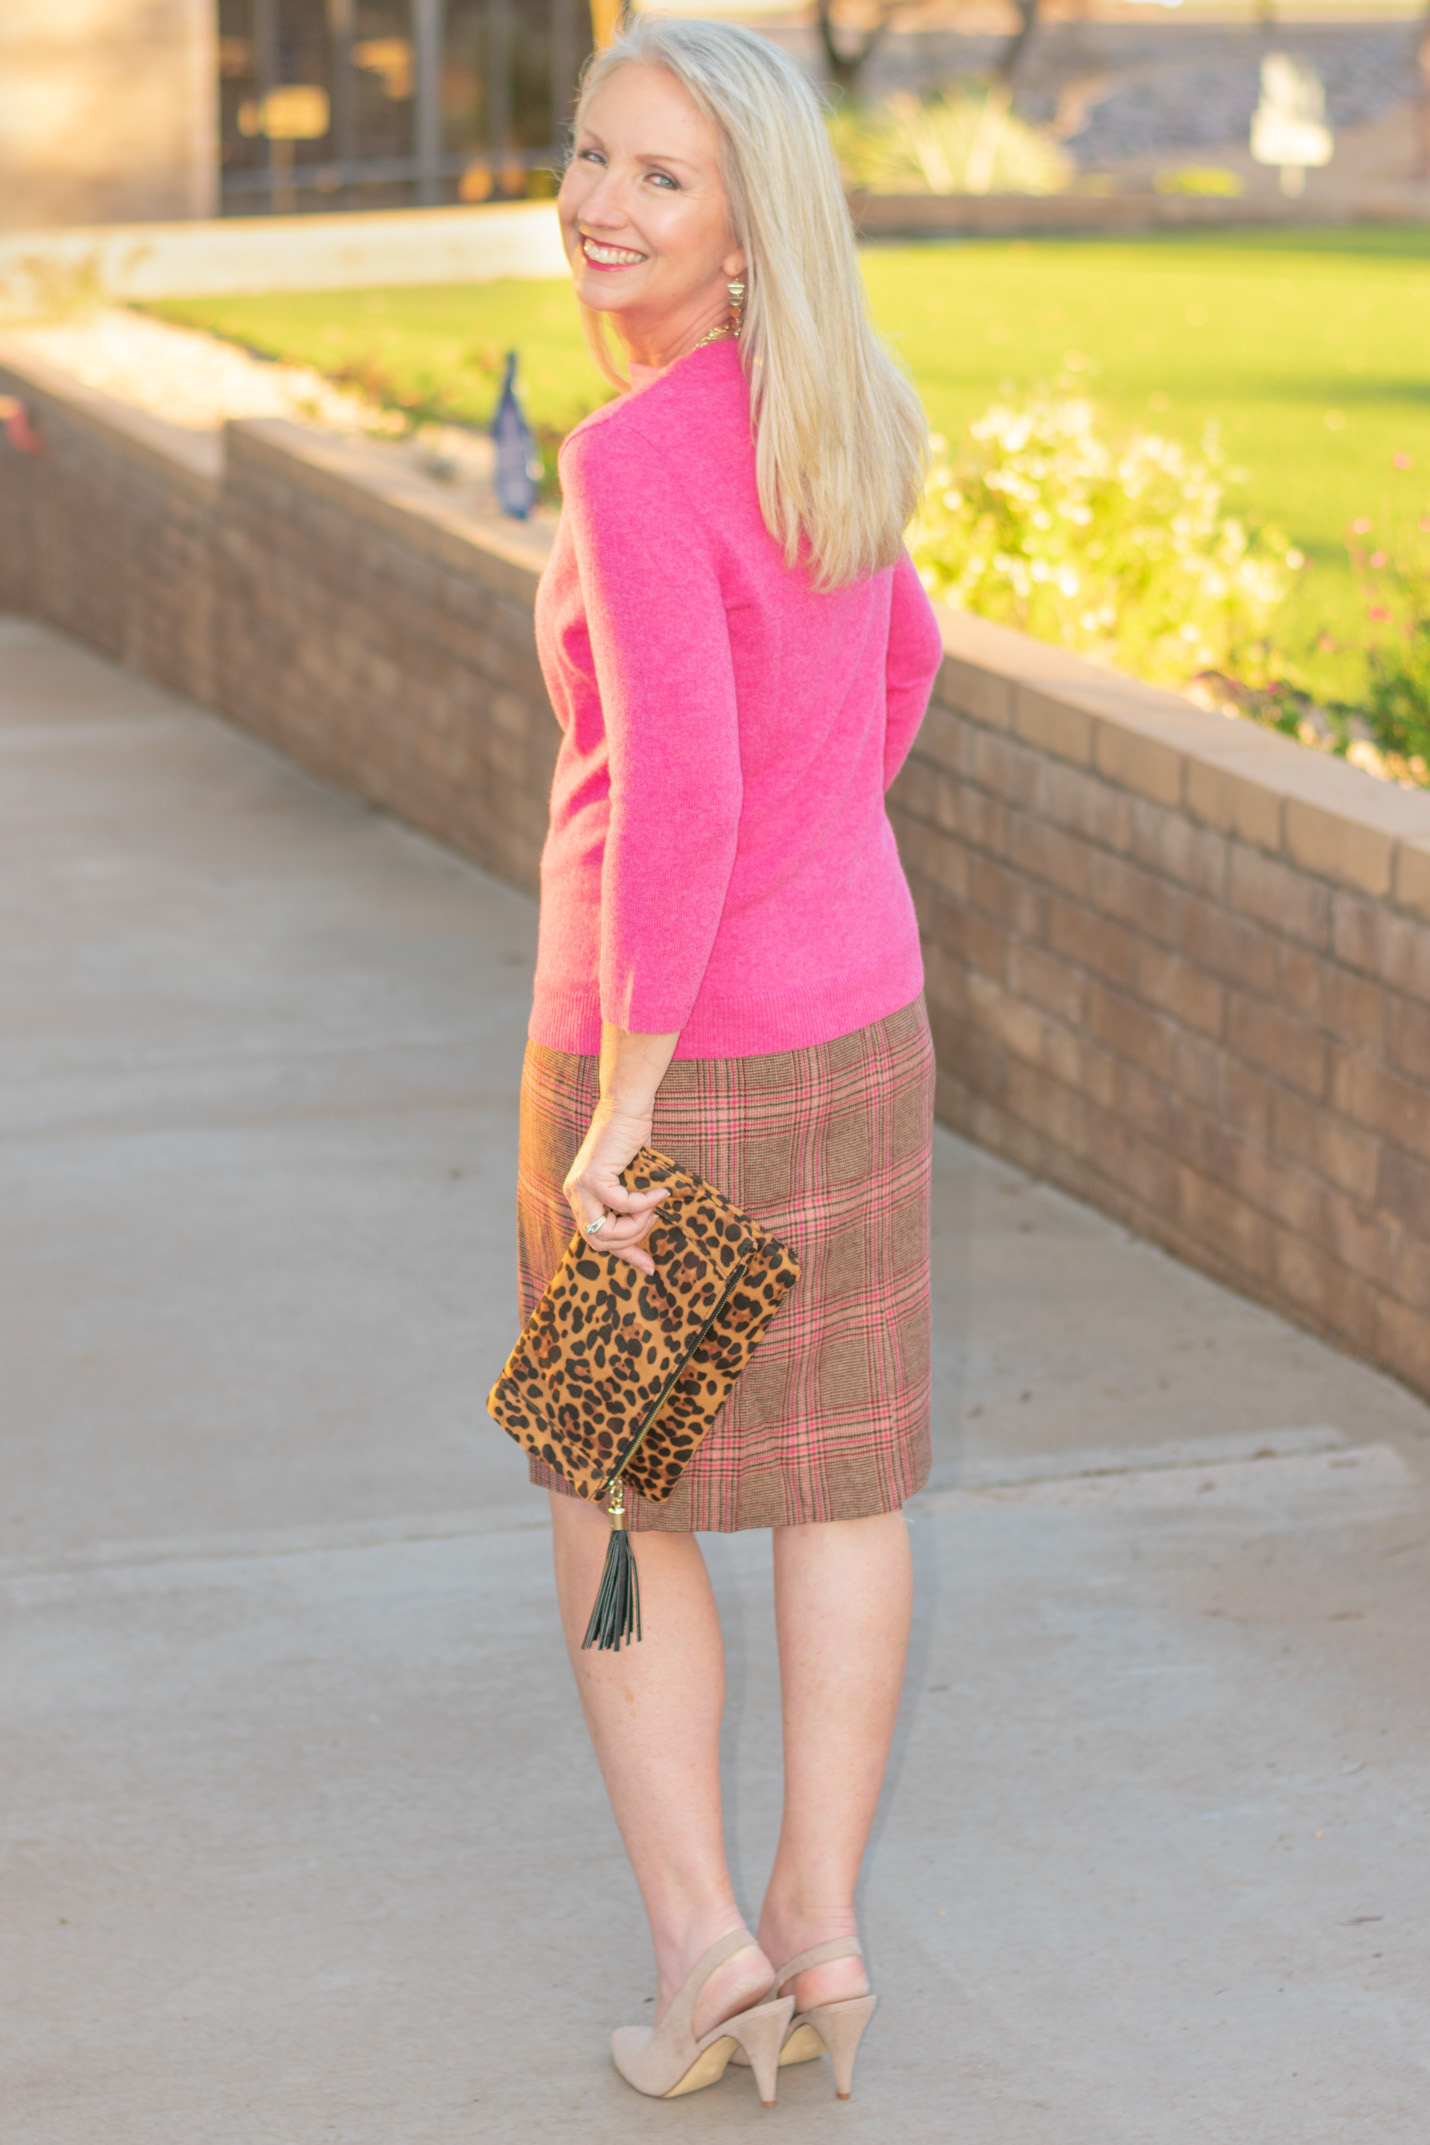 Skirt and Cashmere Sweater in Soft Shades of Fall 